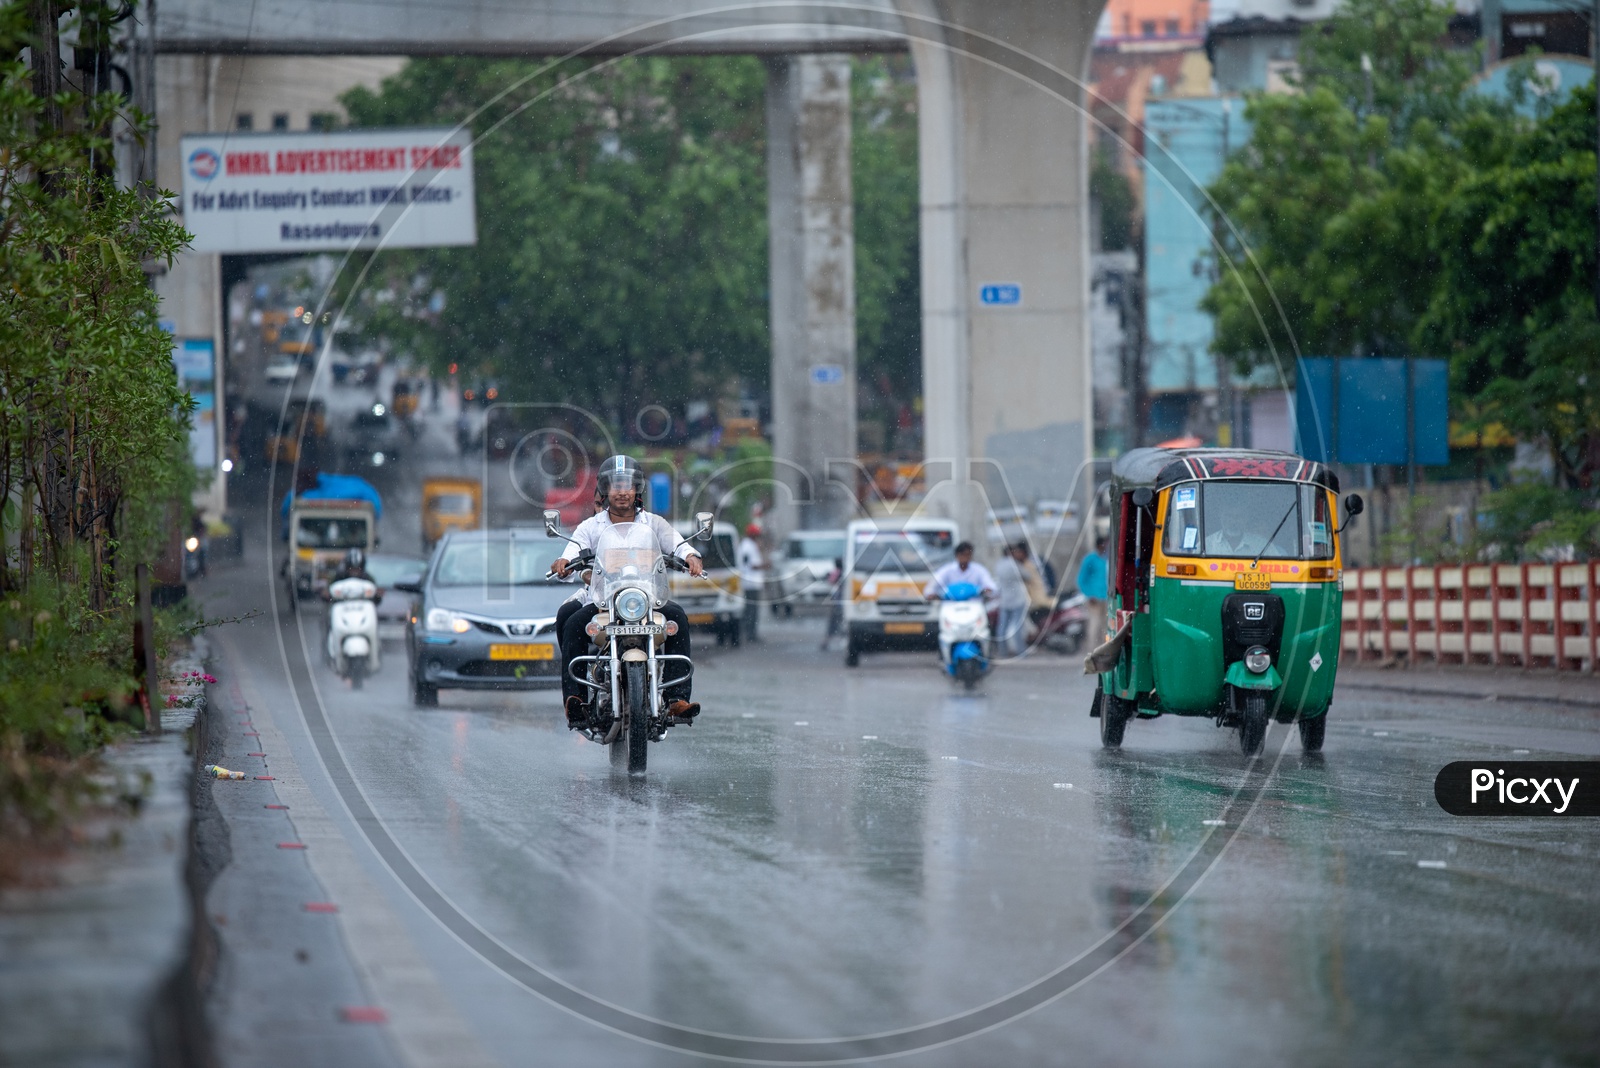 Commuting Vehicles on the City Roads on a Rainy Day